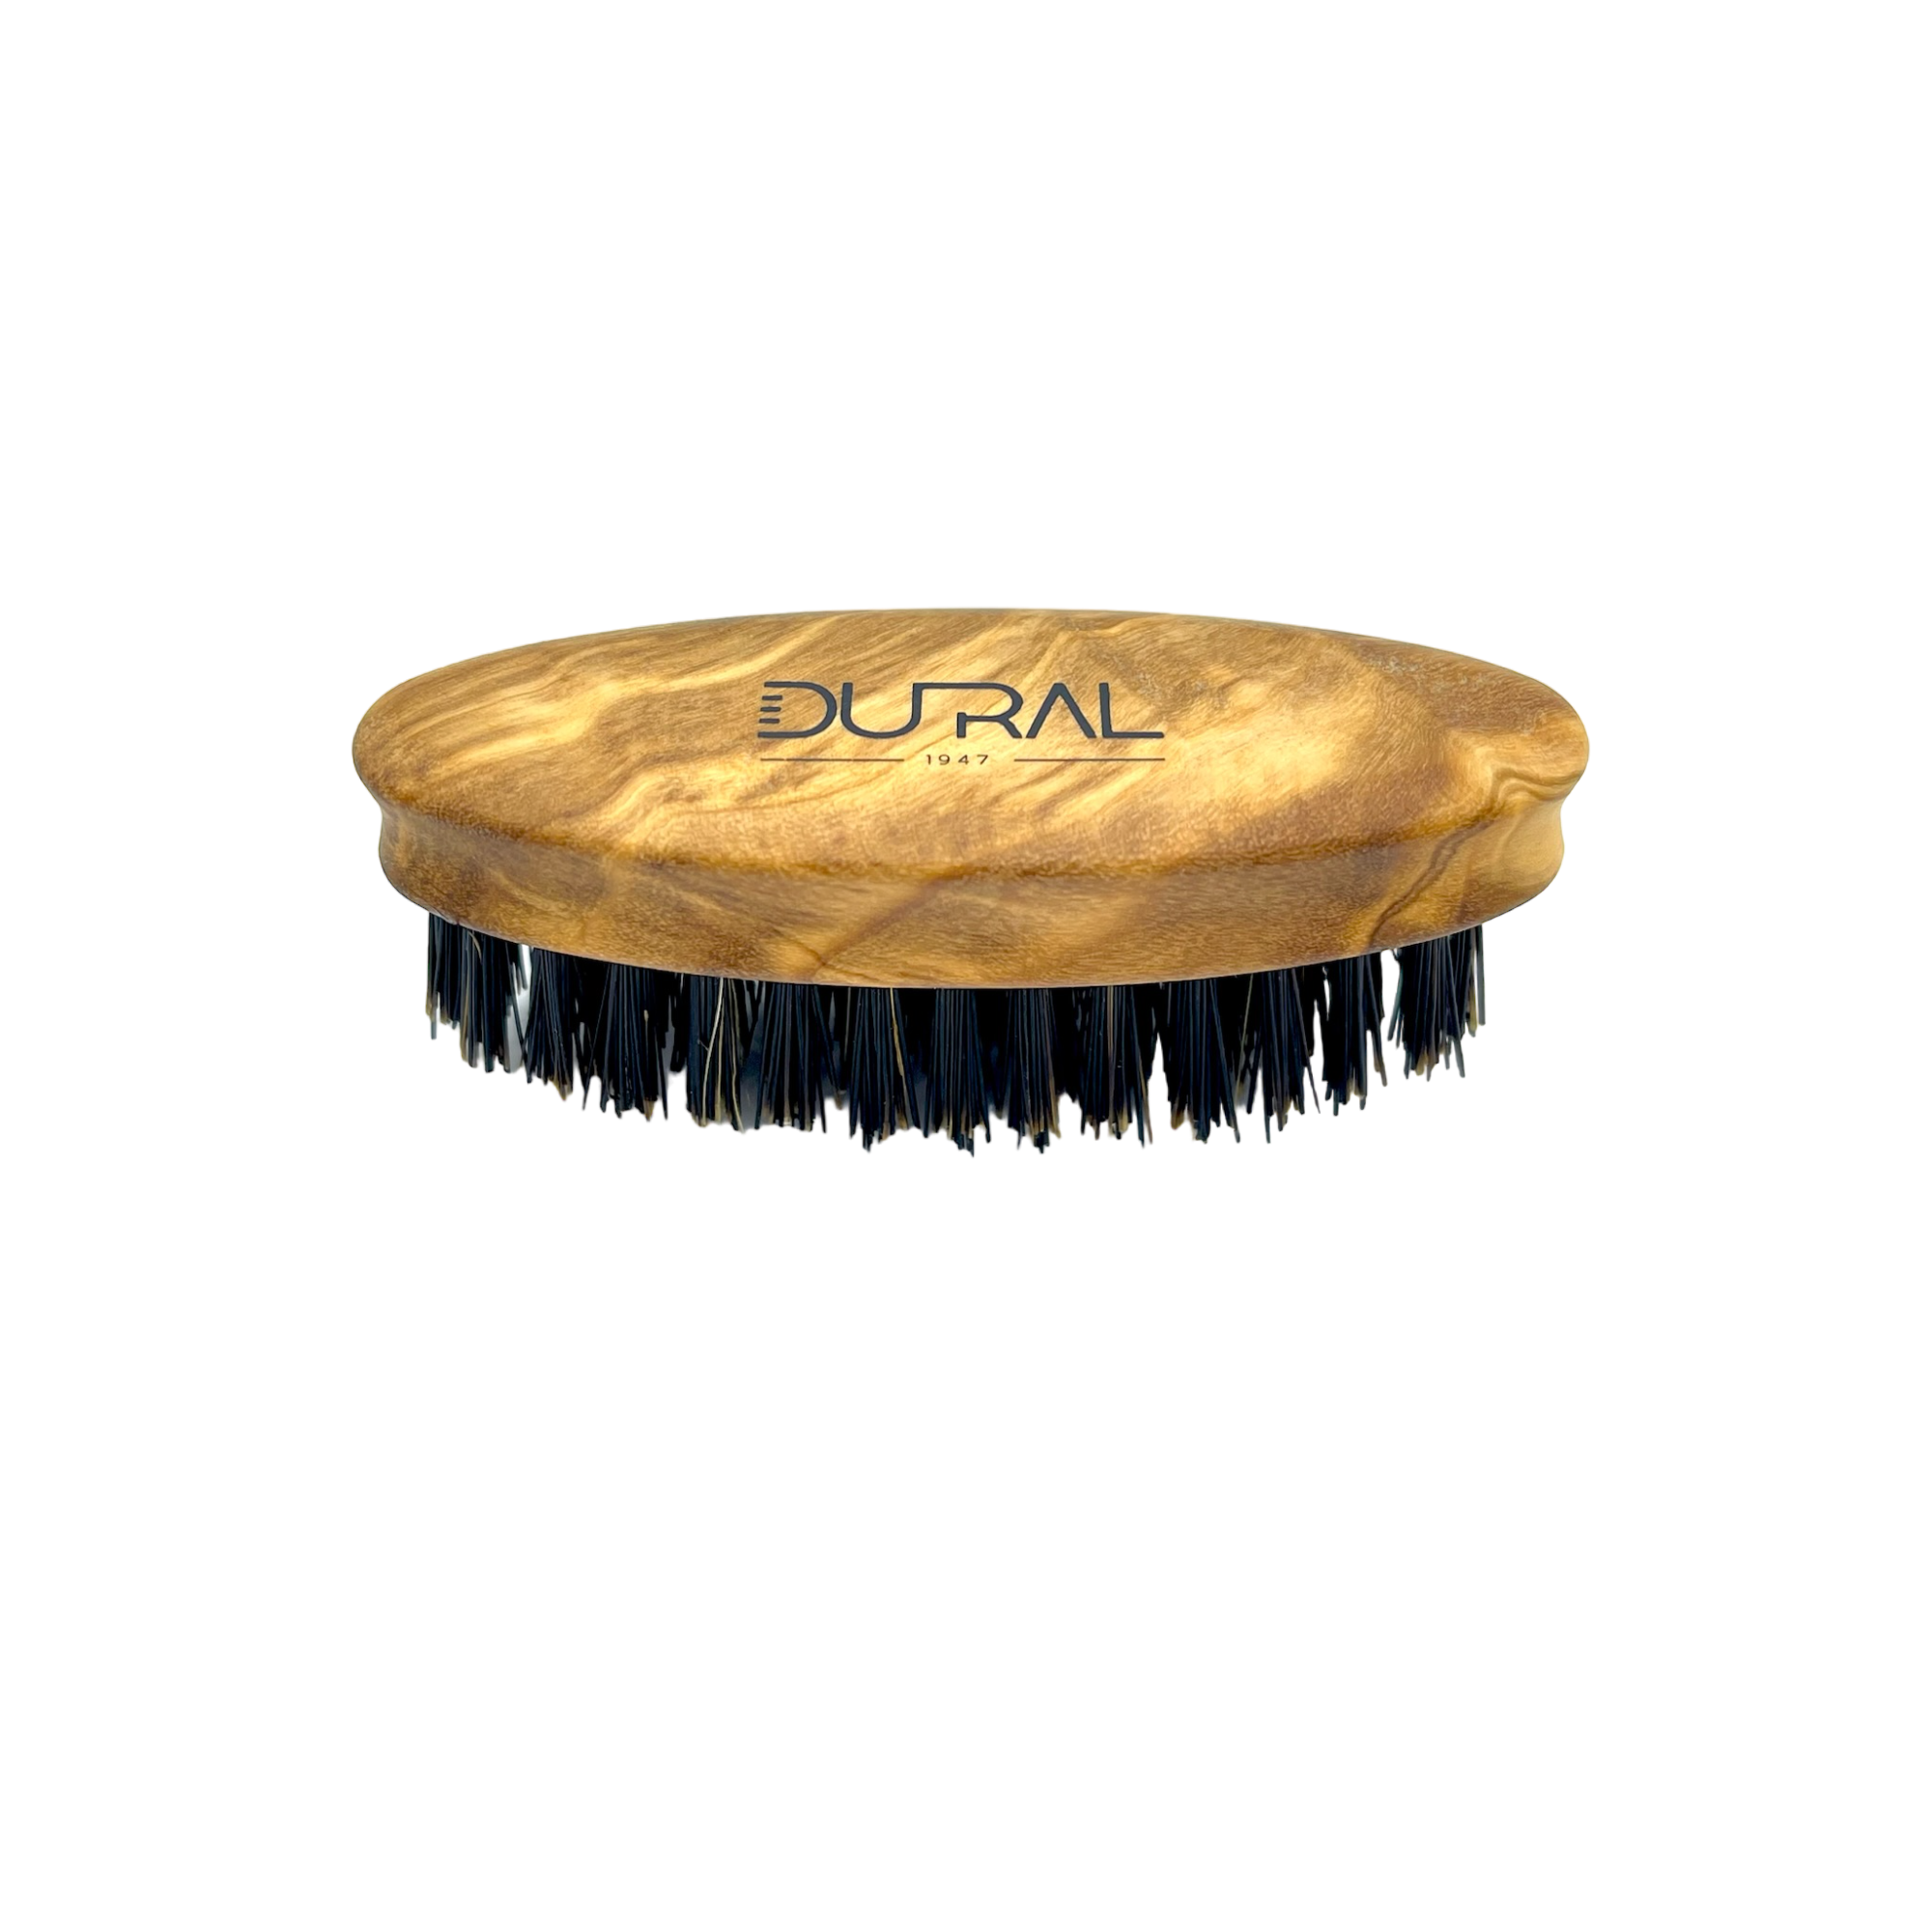 Dural Olive wood bear brush with boar bristles